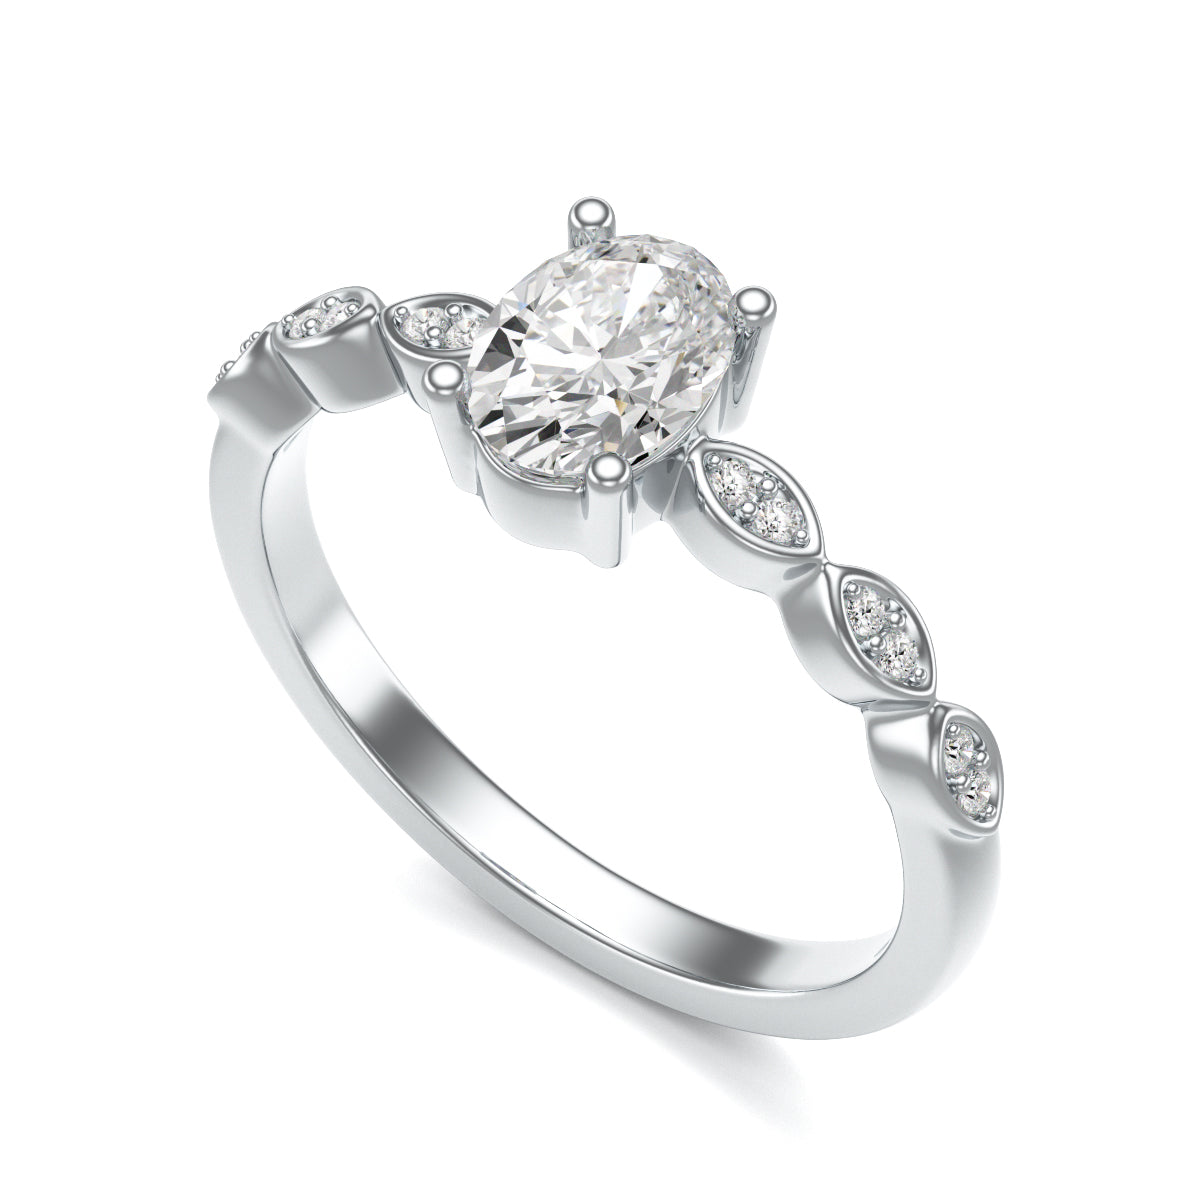 Diamond Engagement Ring- Oval centre stone with marquise shape shoulders set shank with diamonds